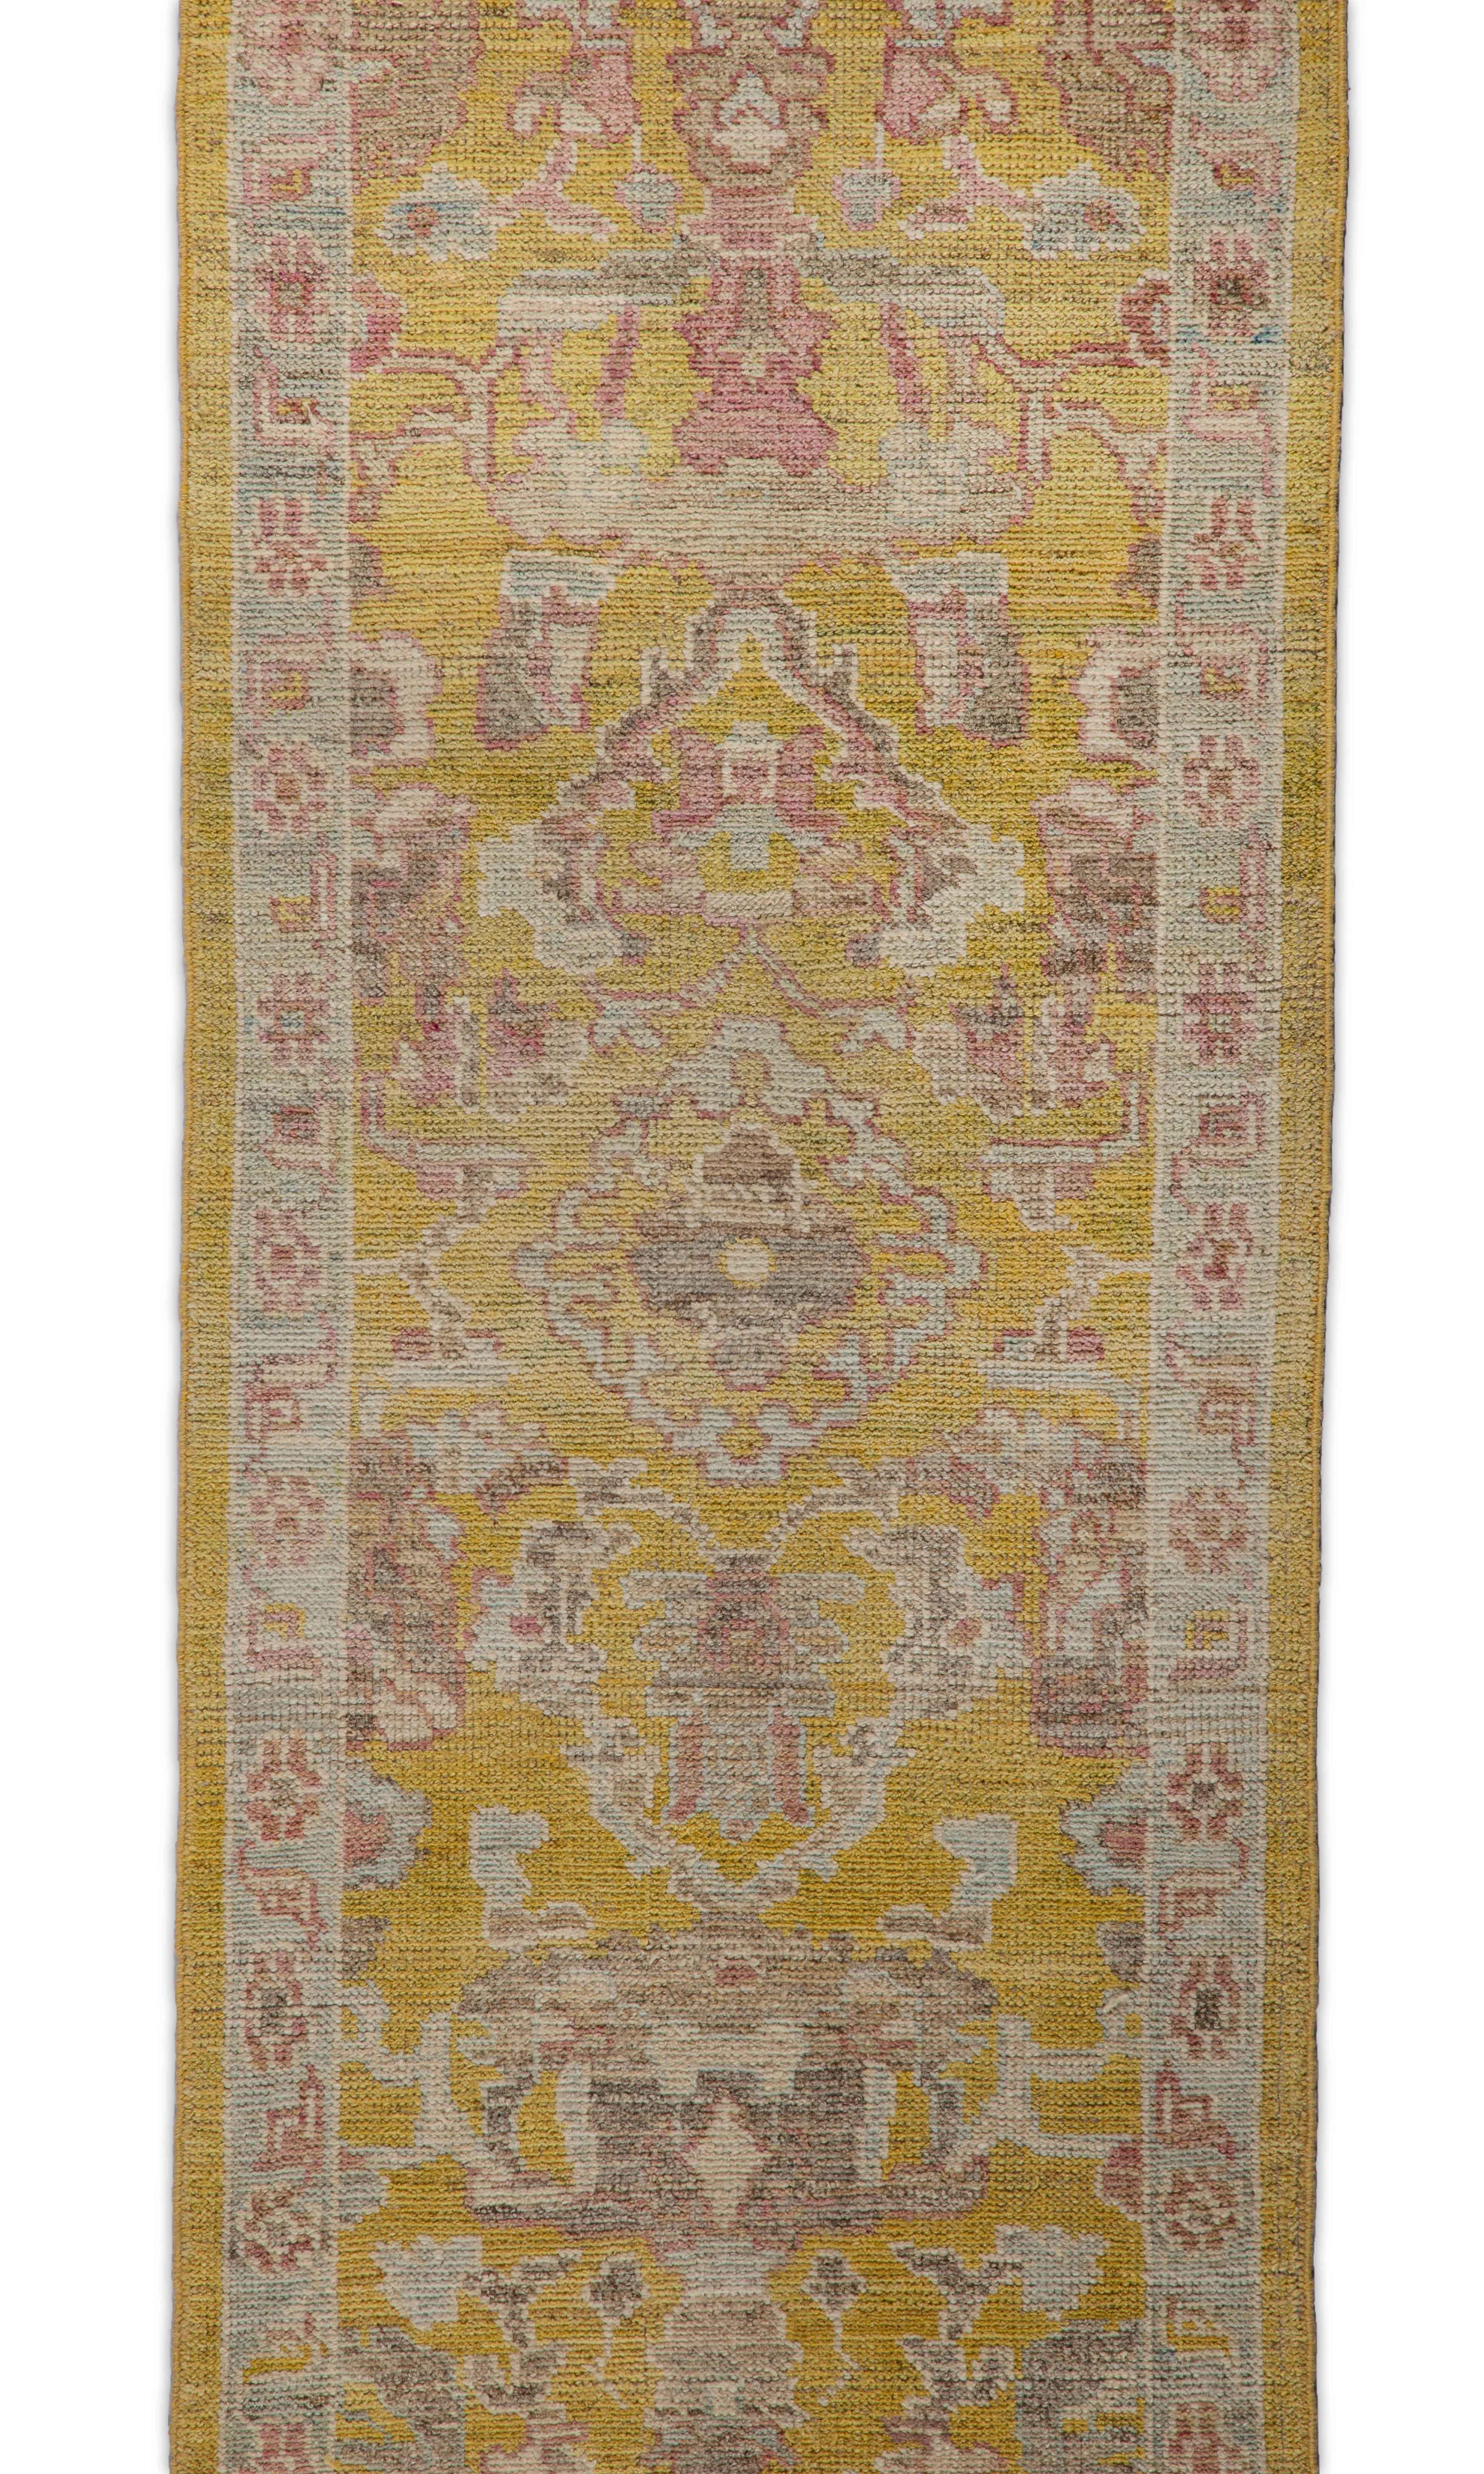 Contemporary Oushak Runner Rug from Turkey with Gold and Pink Floral Patterns For Sale 2